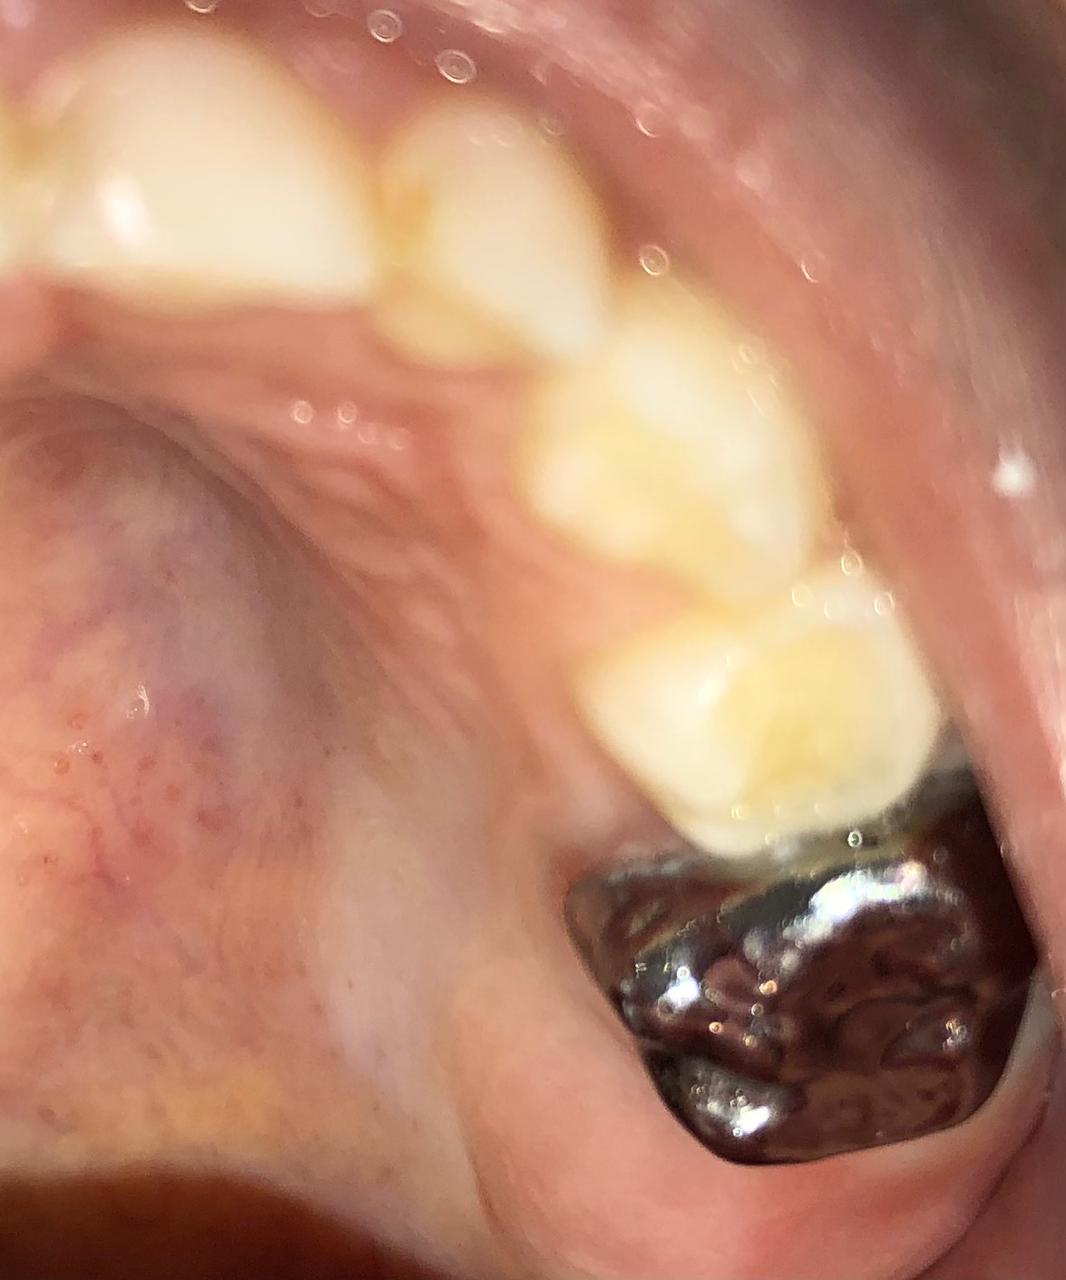 Stainless steel crown in primary second molar